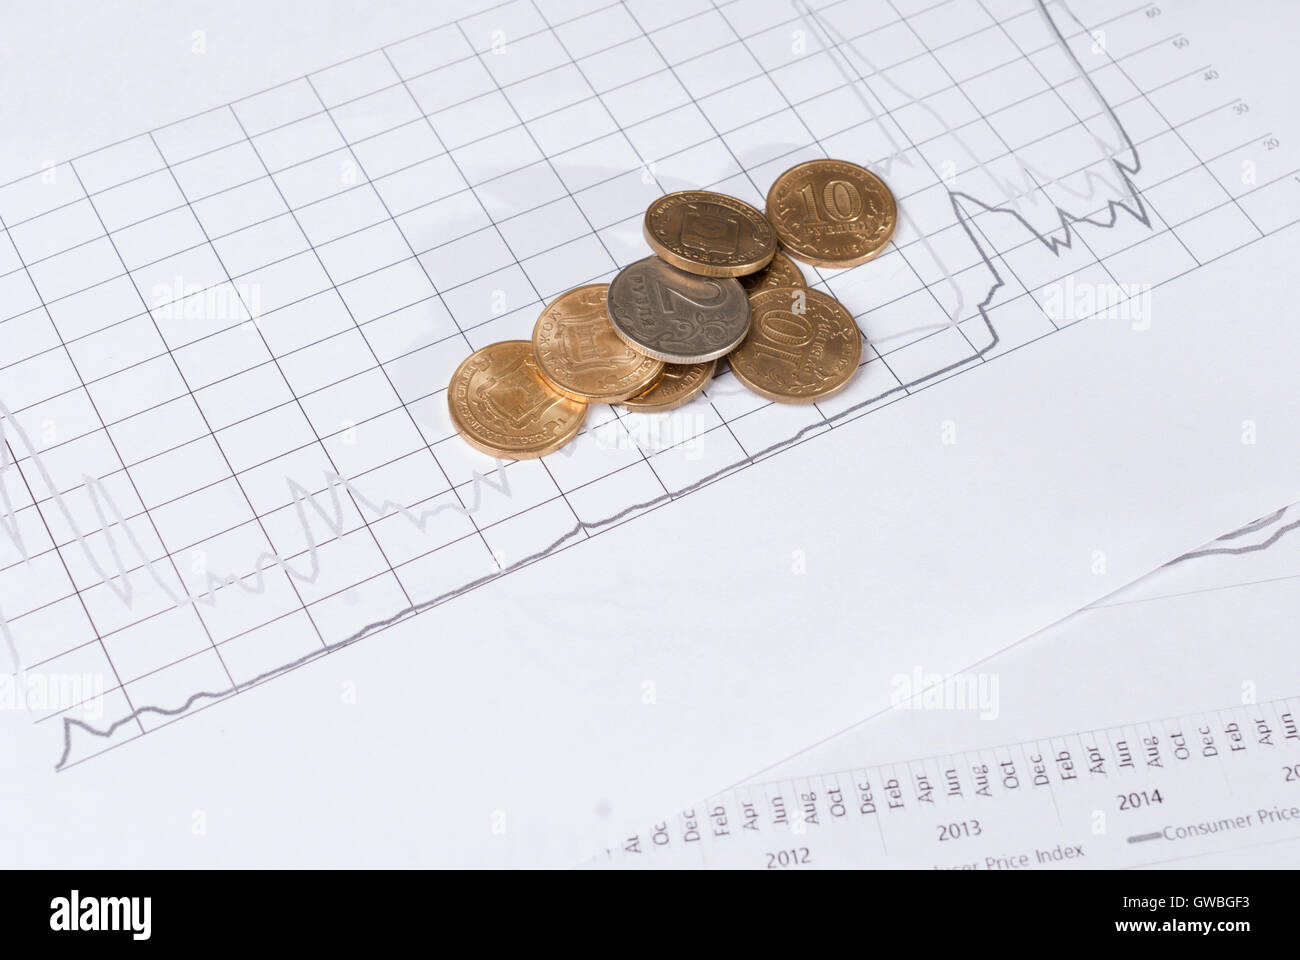 Stacks of coins on financial charts. Concept business investment plan Stock Photo